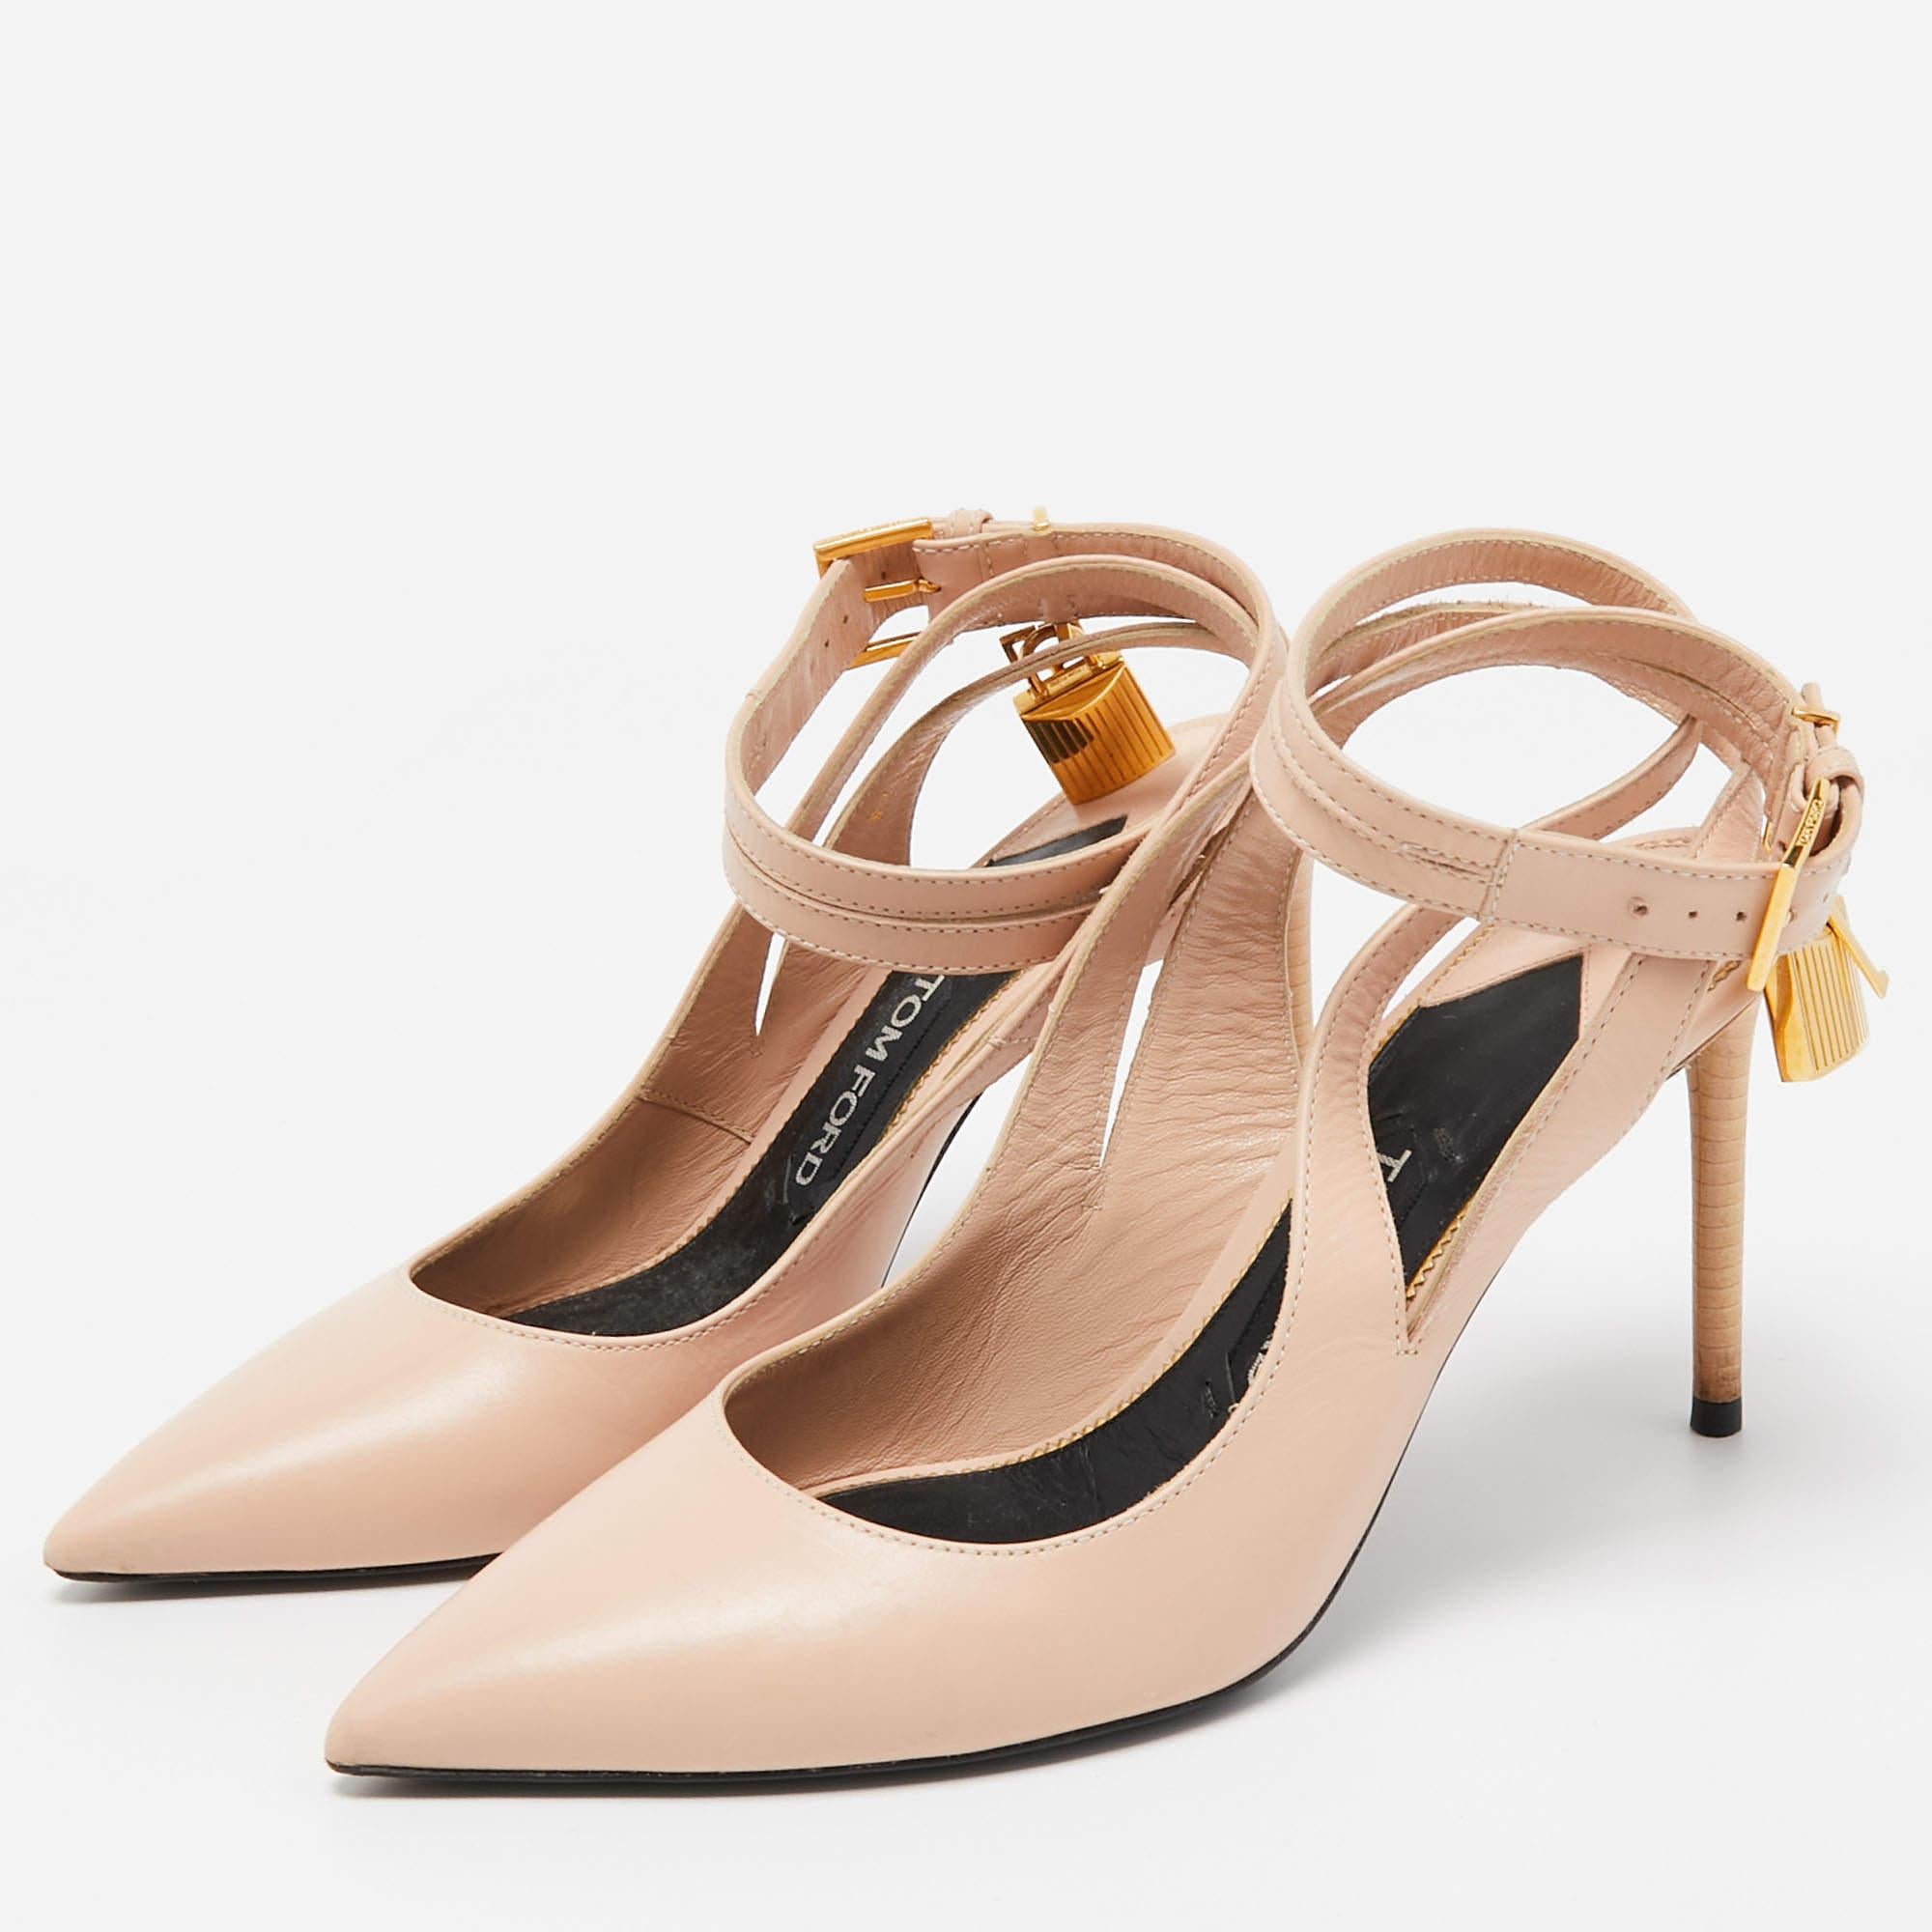 Tom Ford Beige Leather Padlock Pumps Size 39 For Sale 2